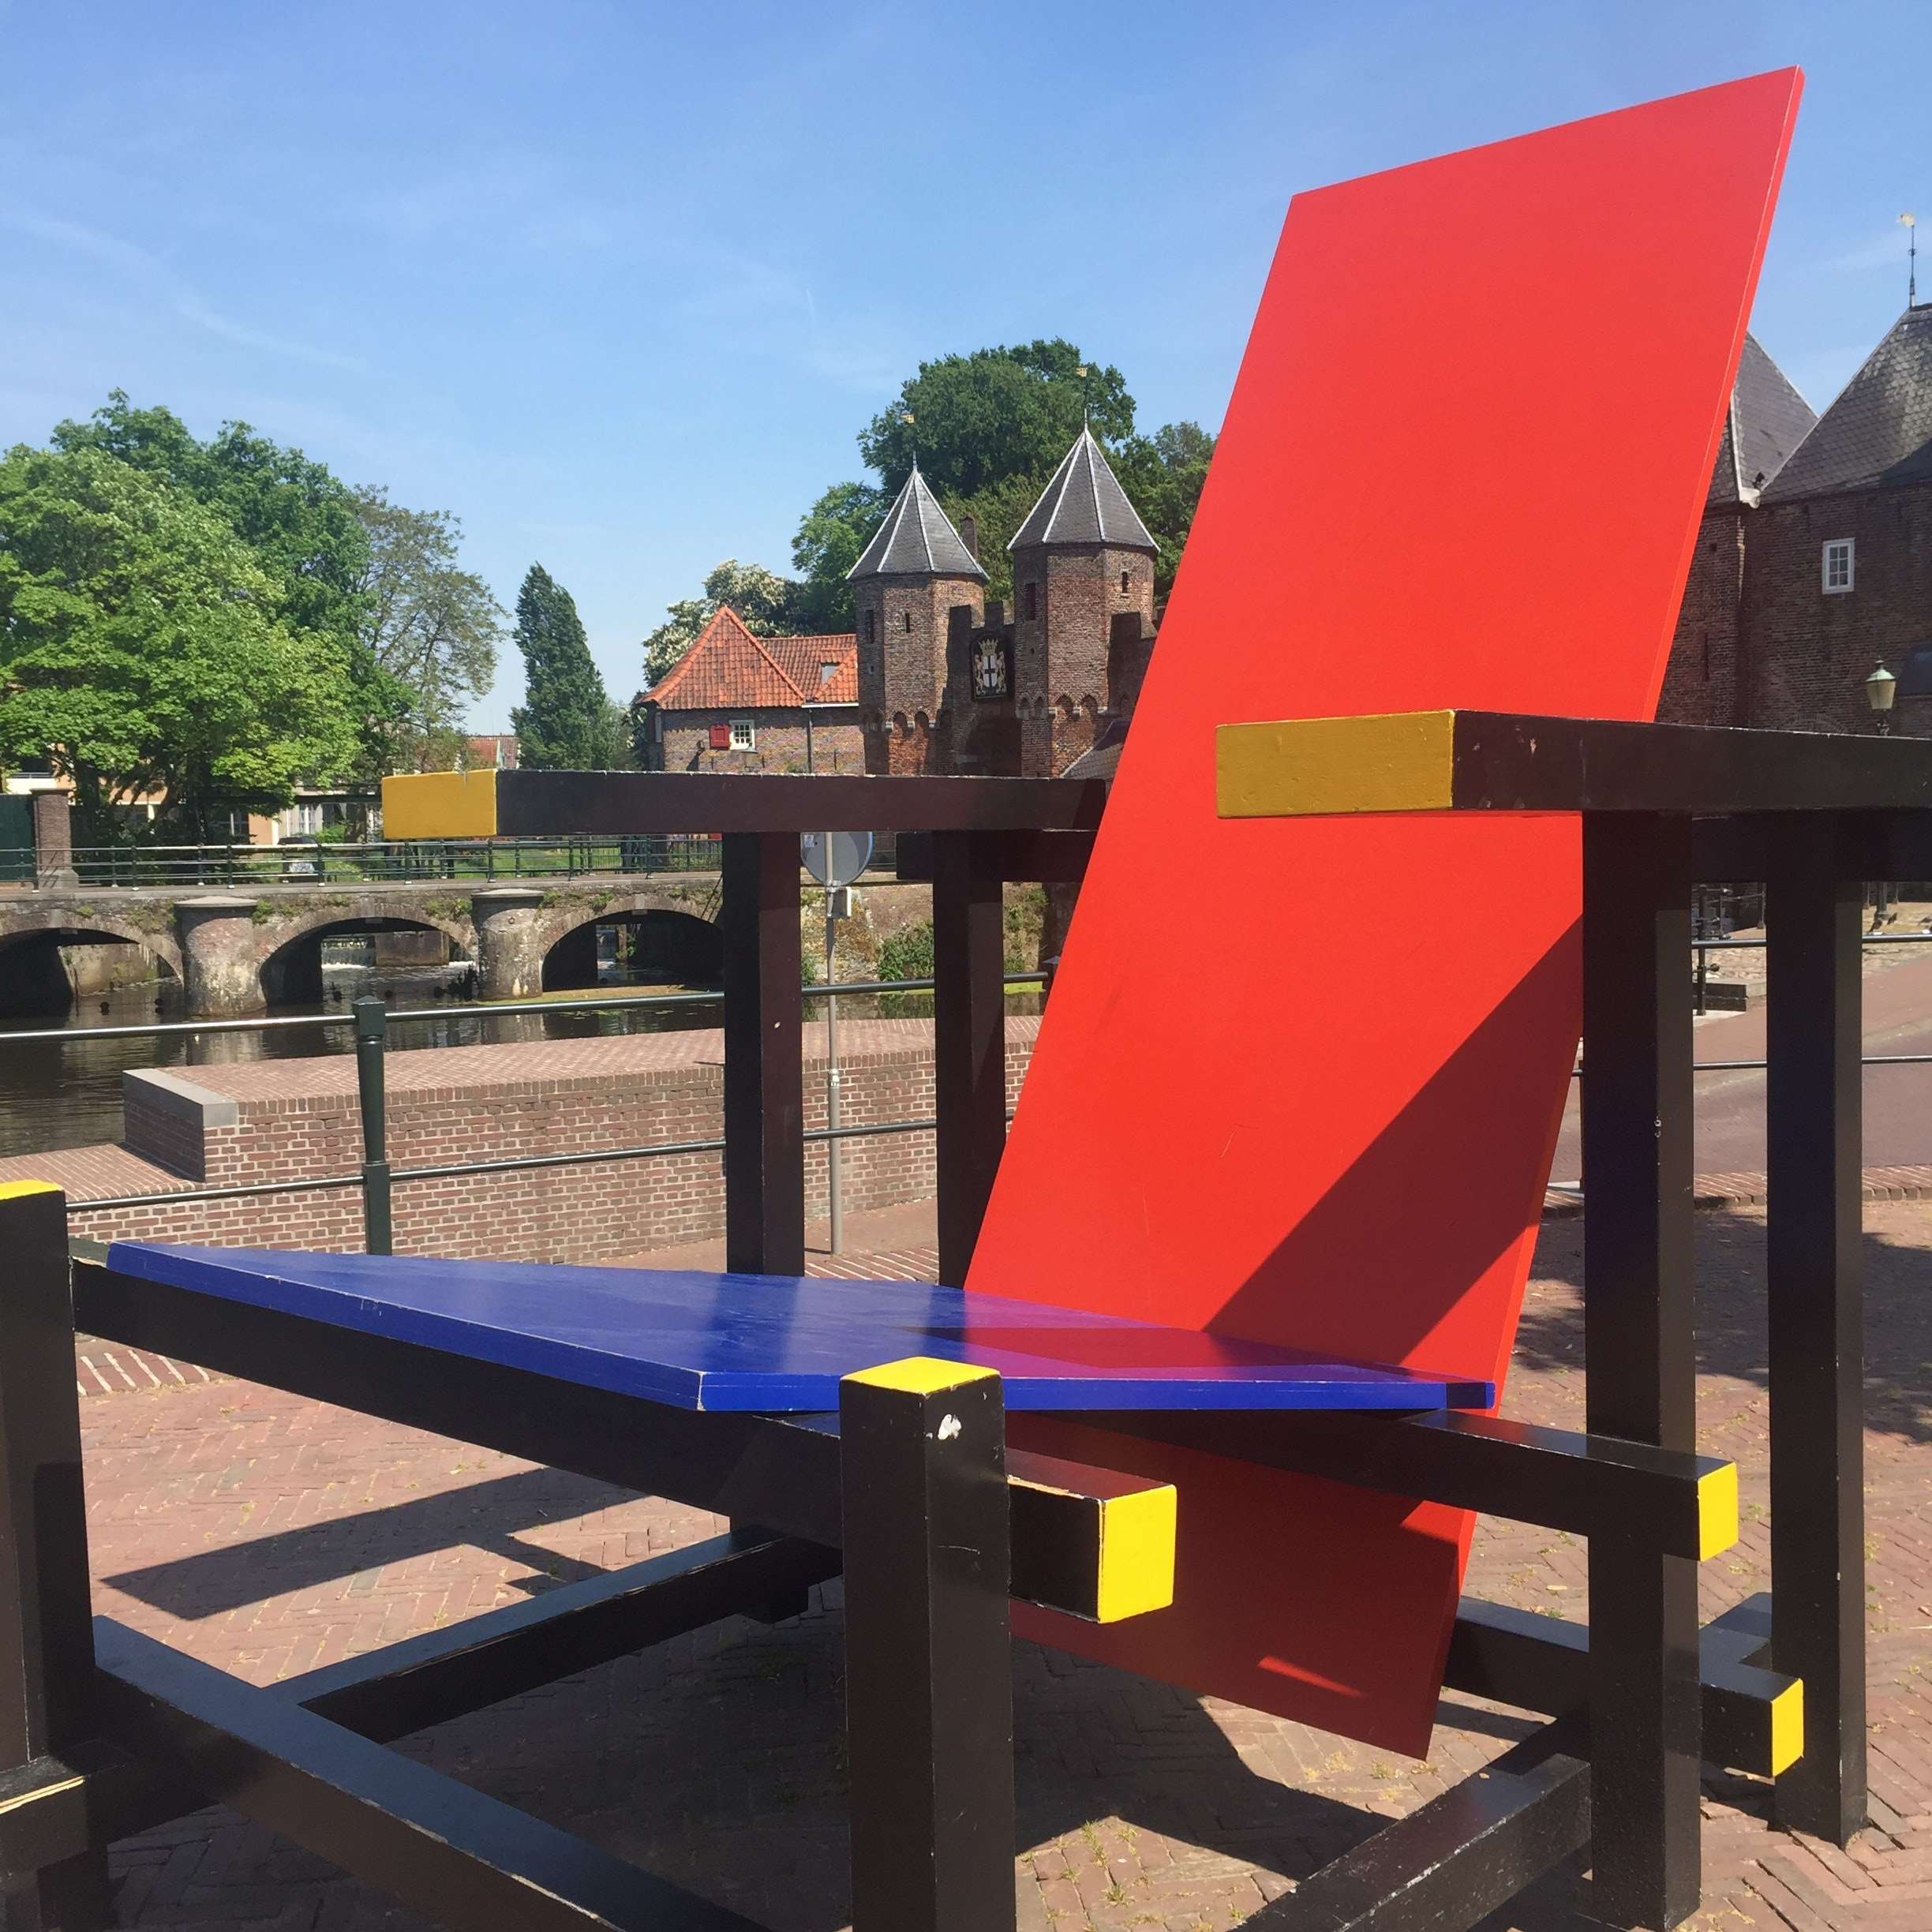 A Red Blue Chair originally designed by Gerrit Rietveld can be found in Amersfoort